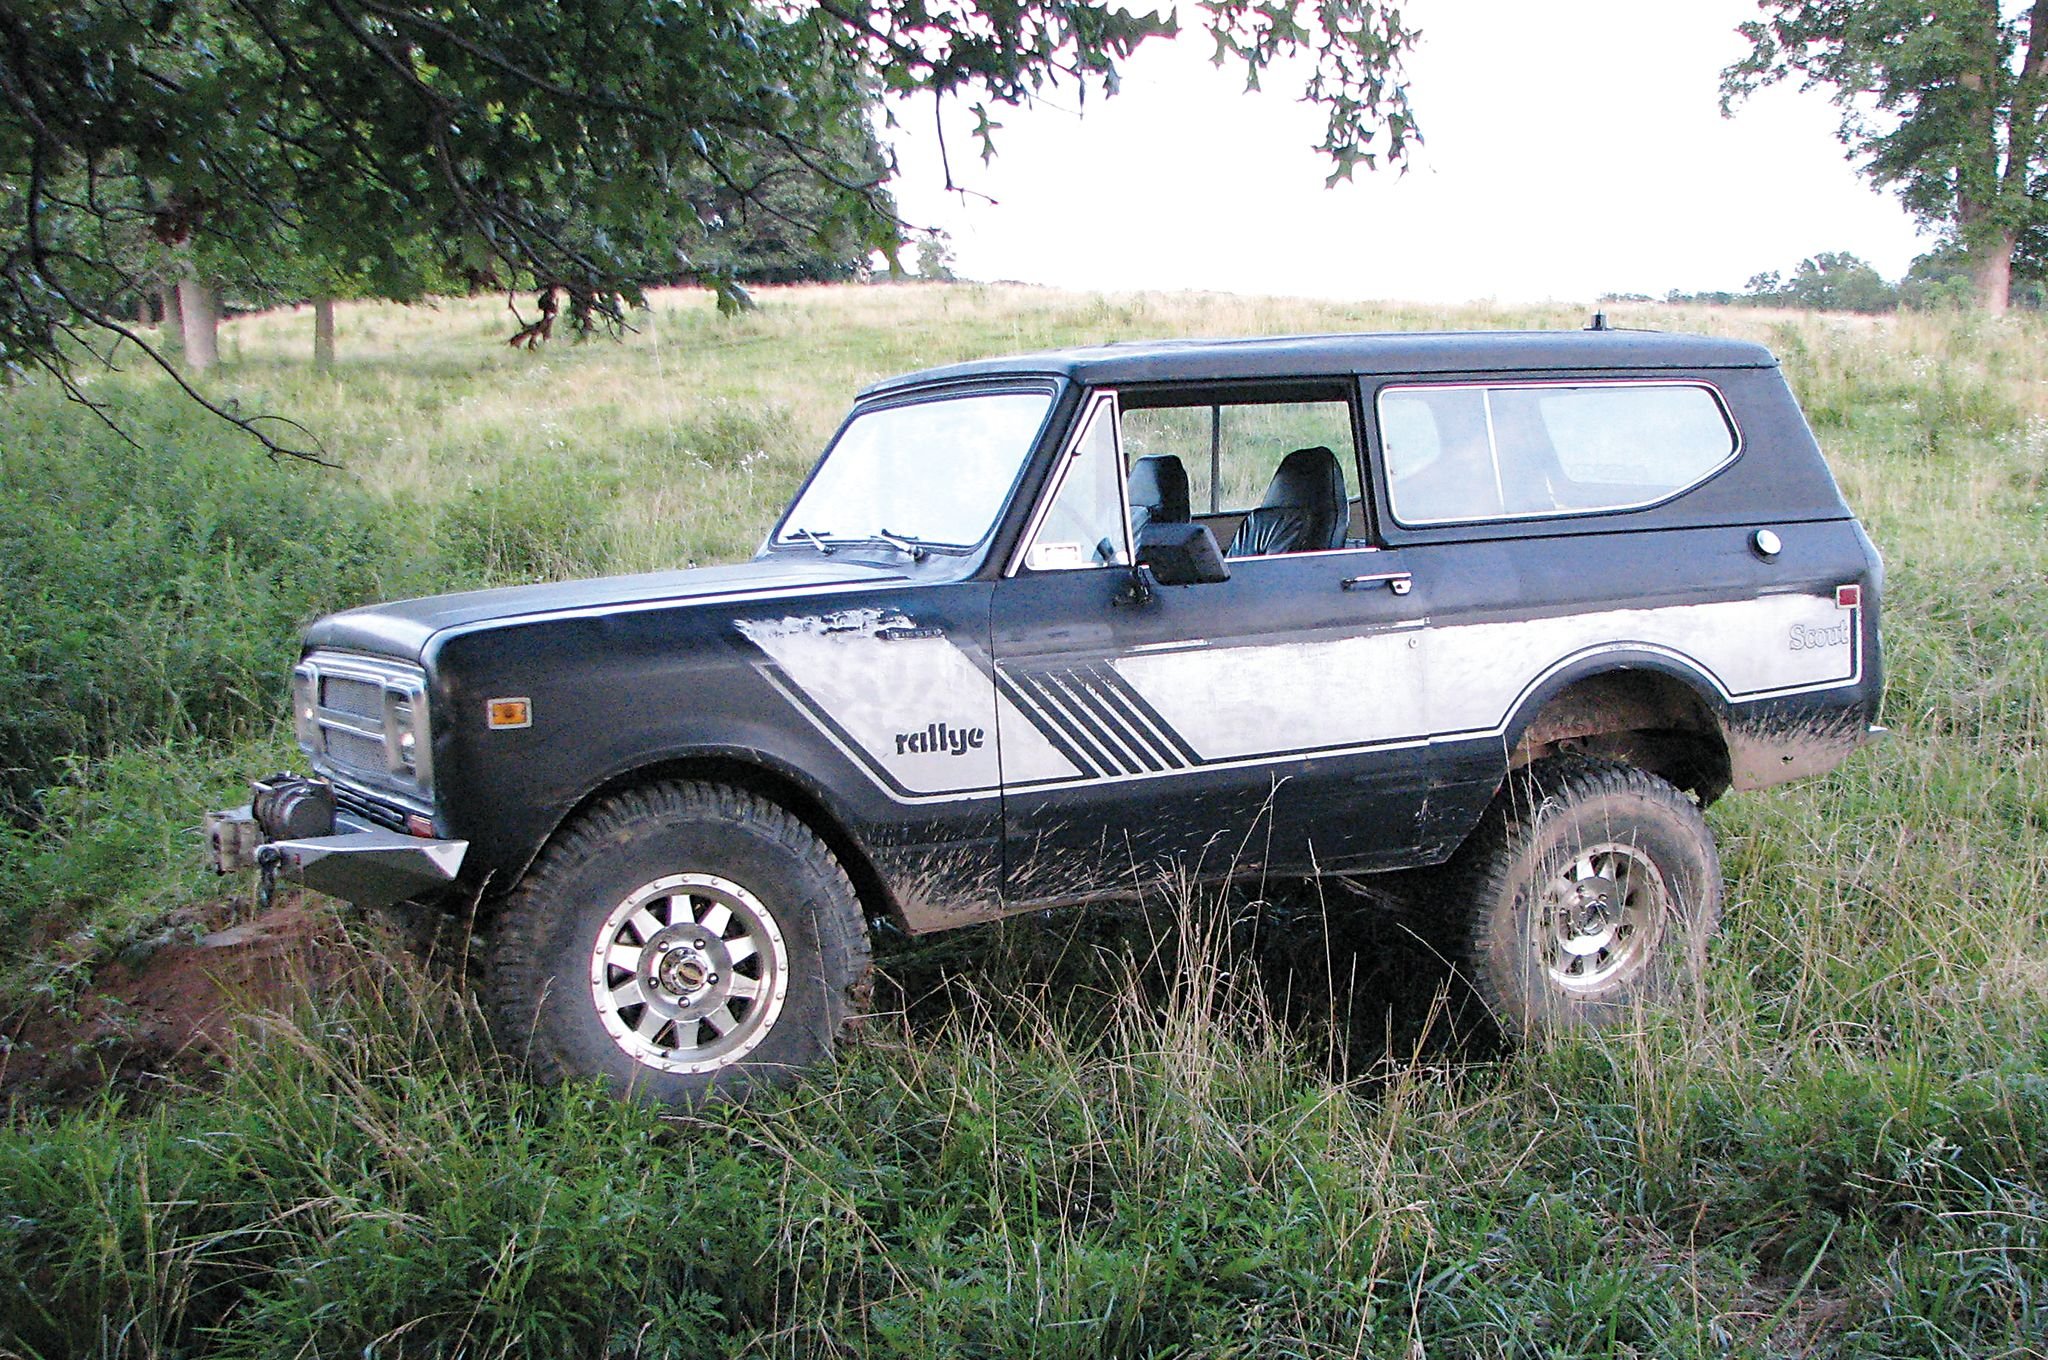 international, Scout, Suv, 4x4, Harvester, Offroad Wallpaper